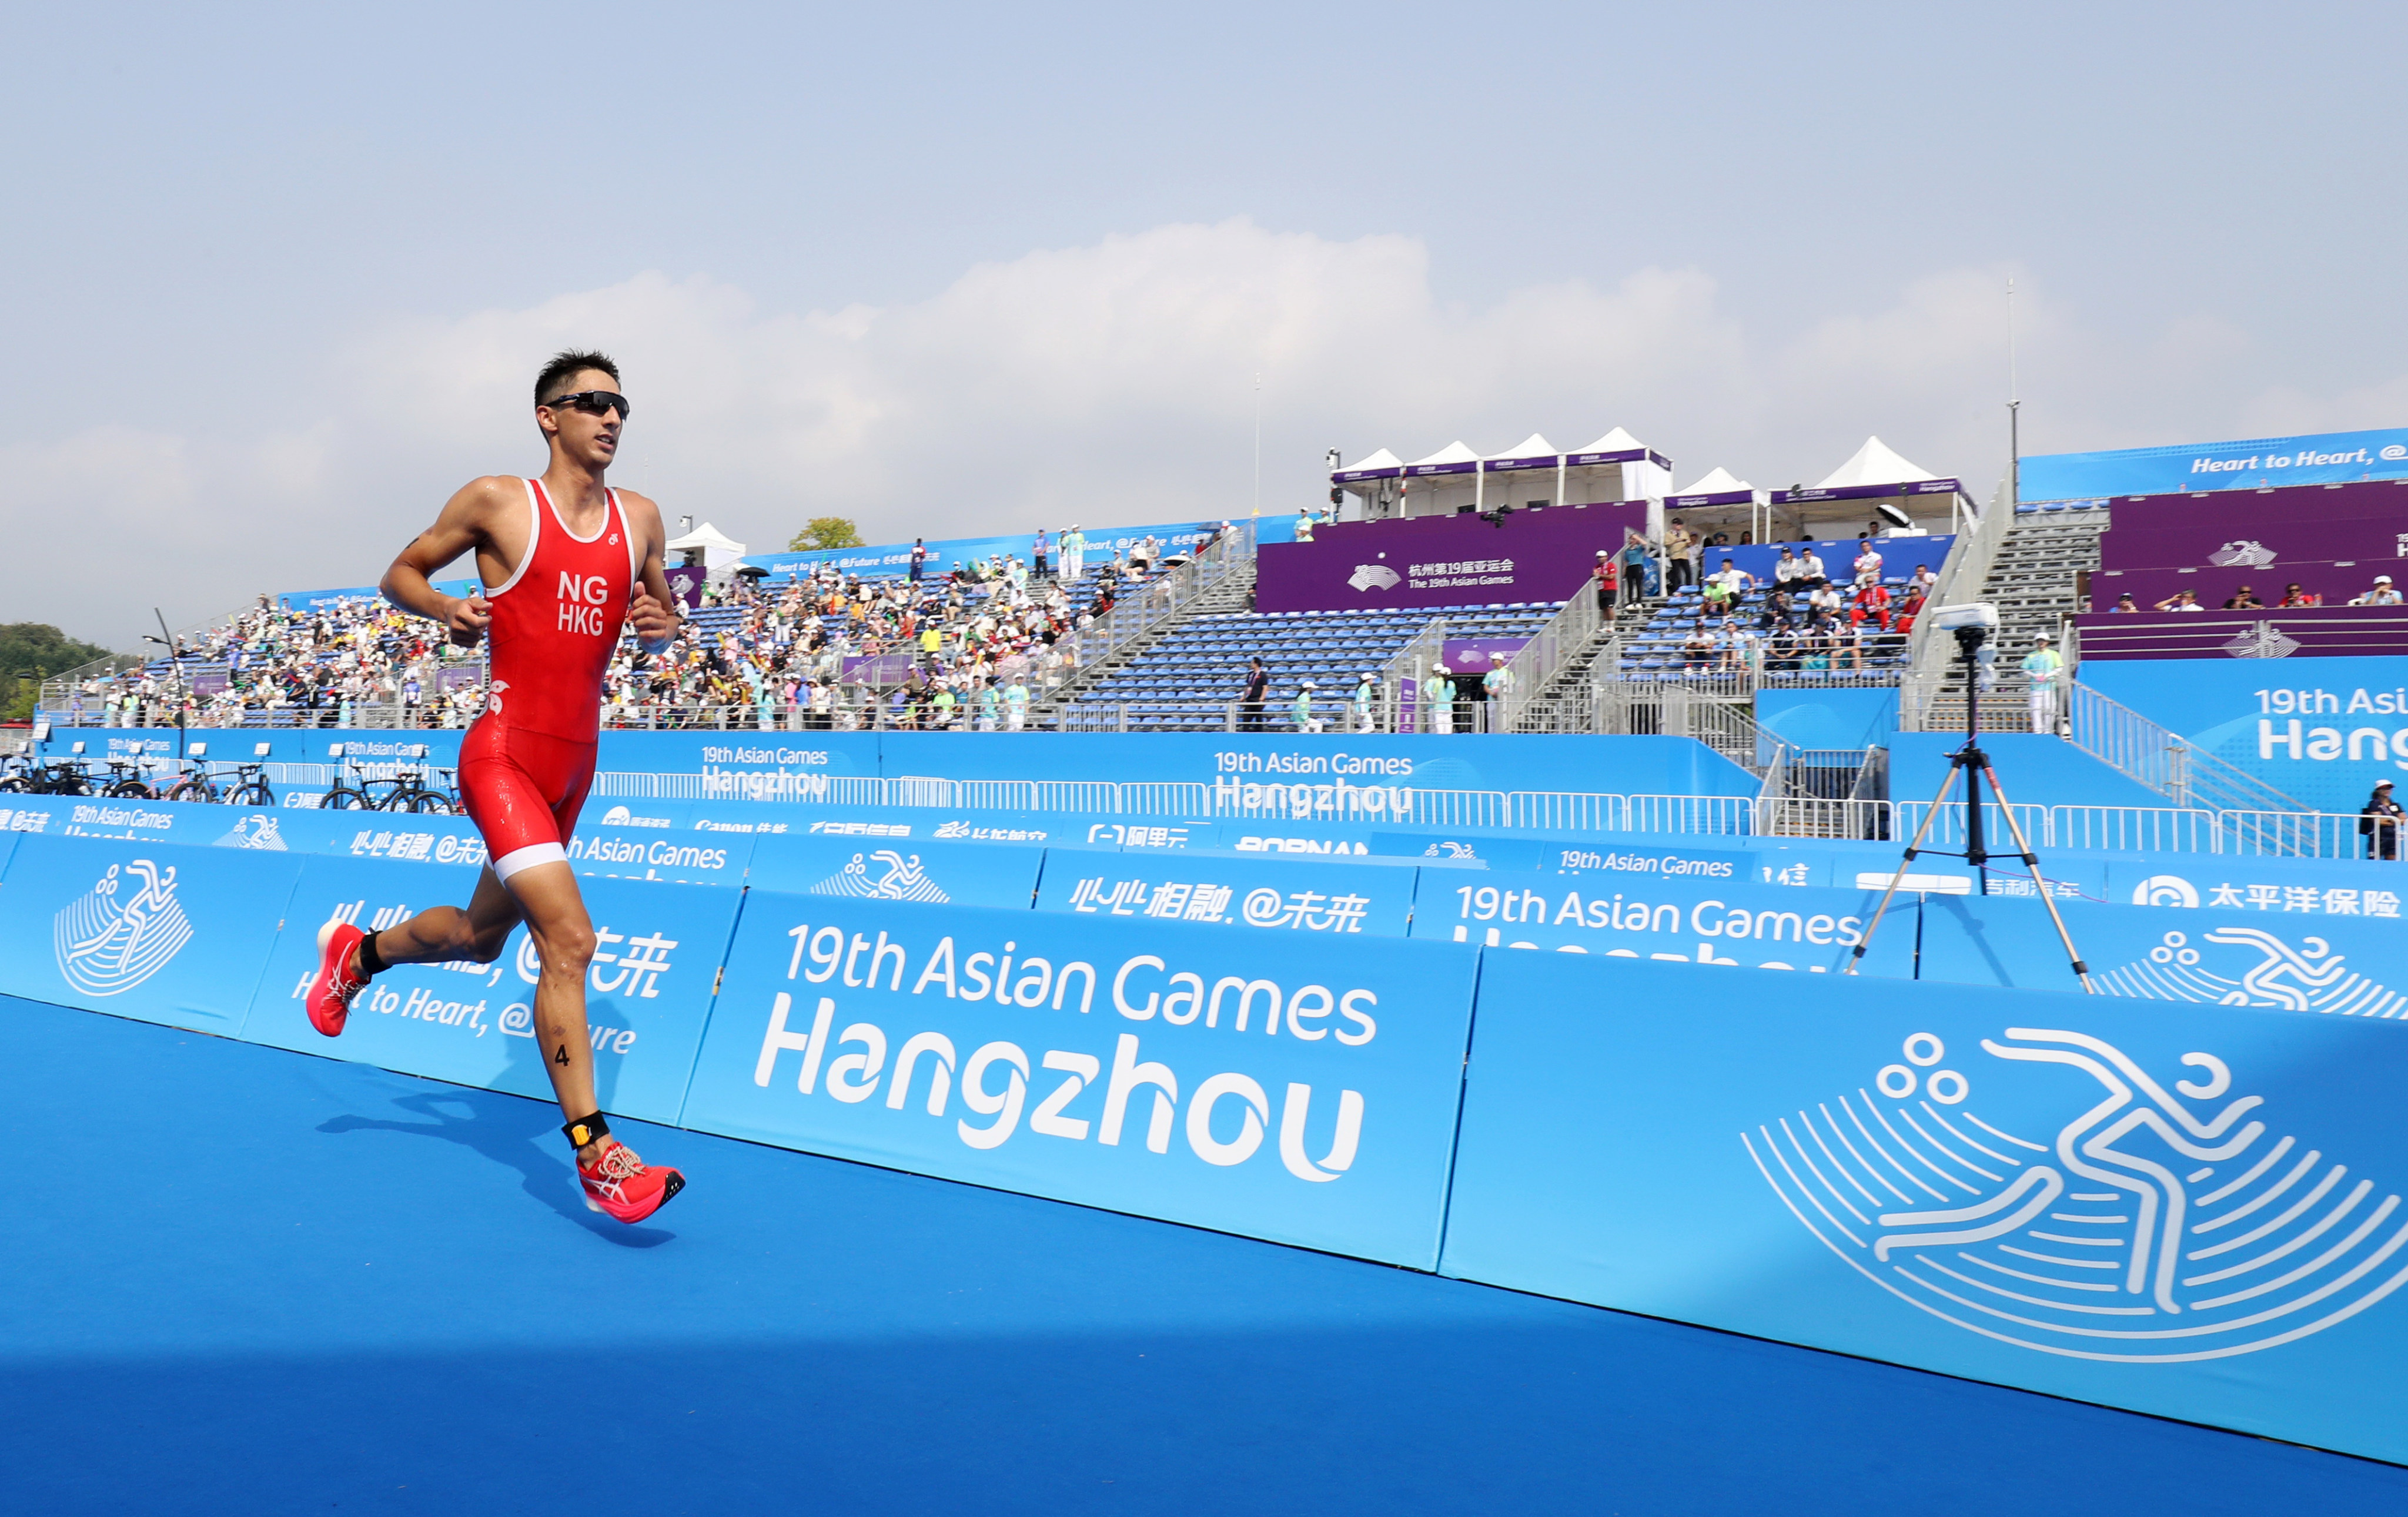 Jason Ng will have the chance to compete in a World Cup event in his home city after harbourfront races were confirmed for next March. Photo: SF&OC